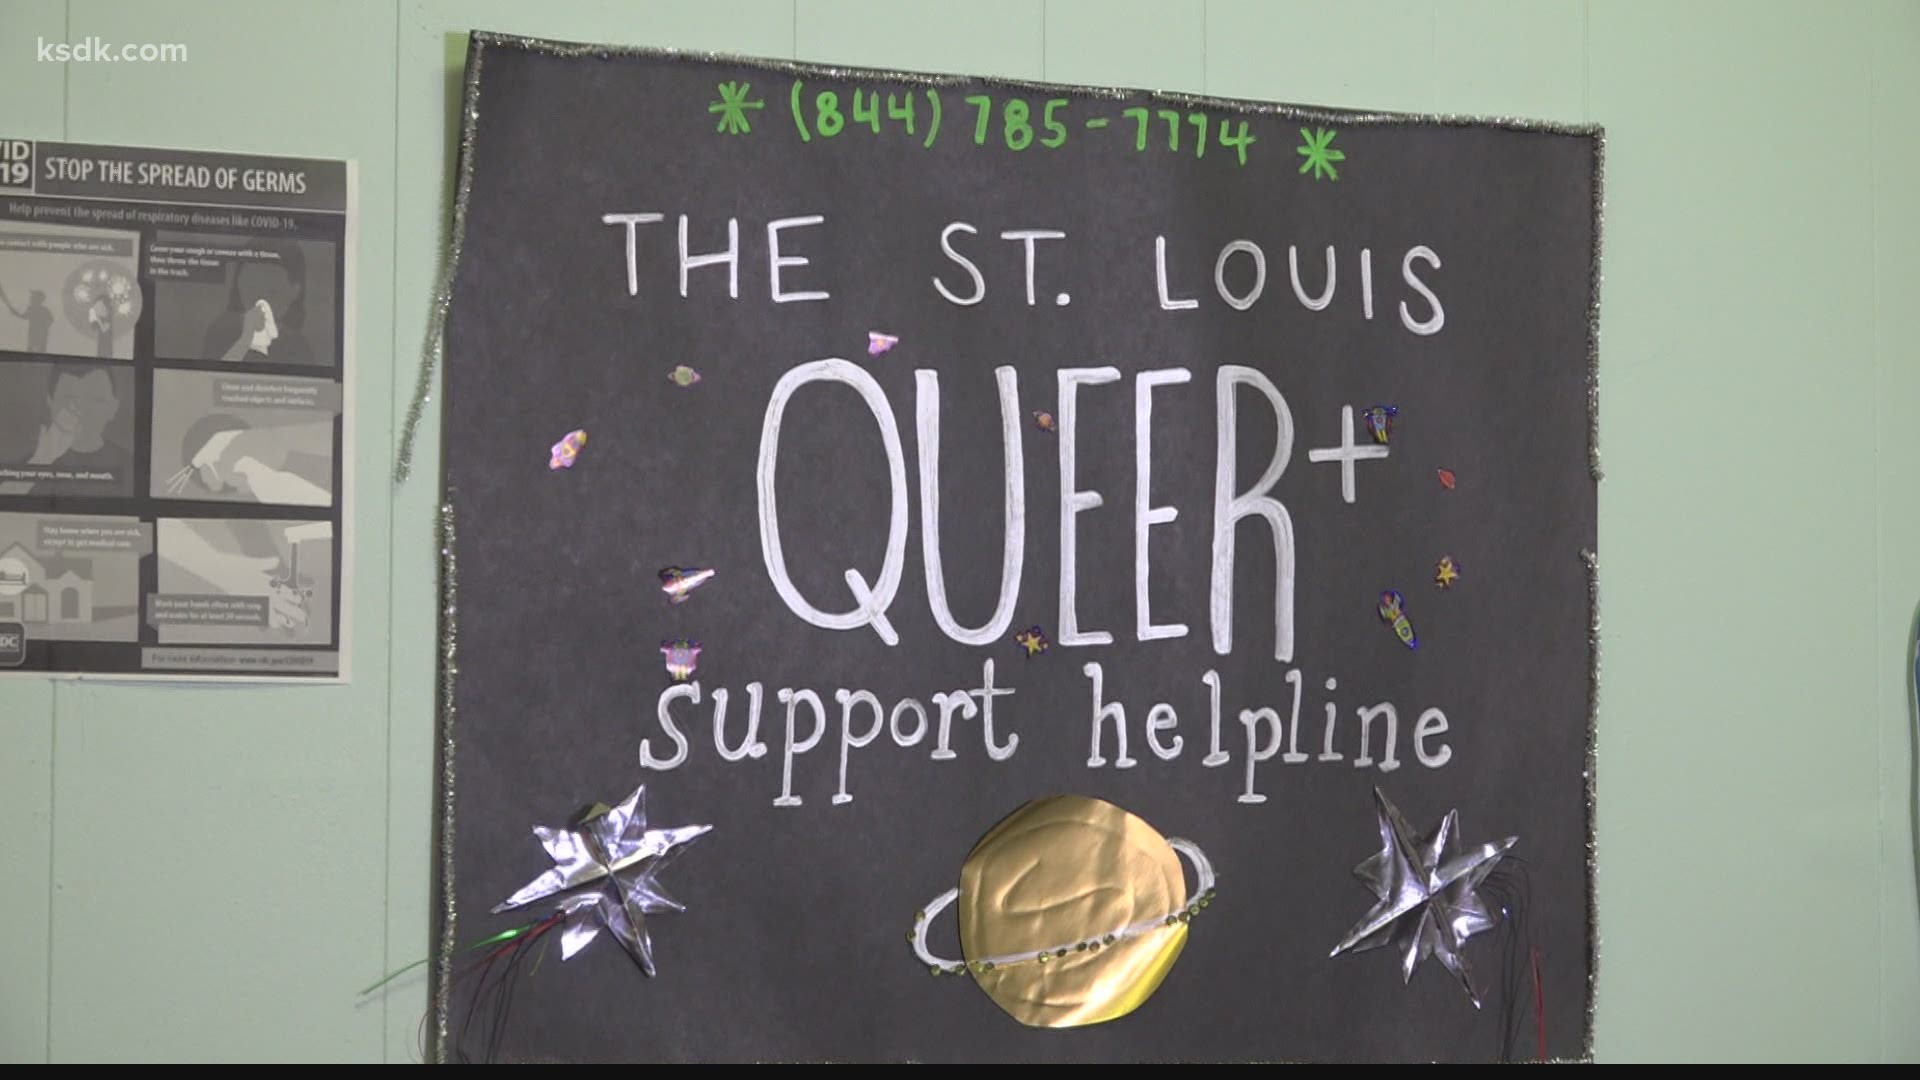 A lack of resources launched an organization to help the LGBTQIA community. The St. Louis Queer Support Helpline offers a helping hand in more ways than one.